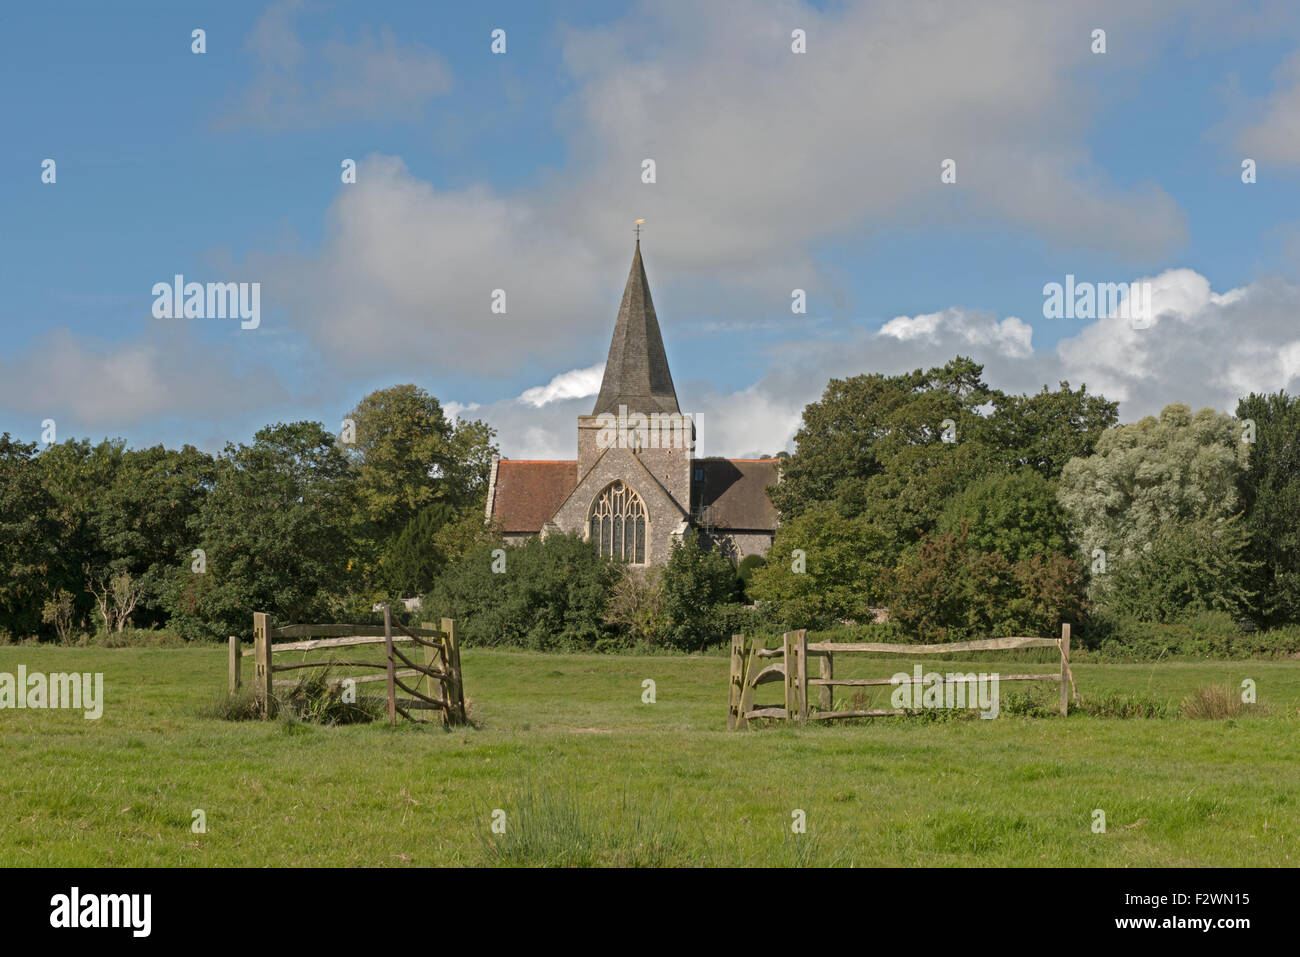 St Andrew's Parish Church in the picturesque village of Alfriston in the South Downs National Park, East Sussex.Uk Stock Photo